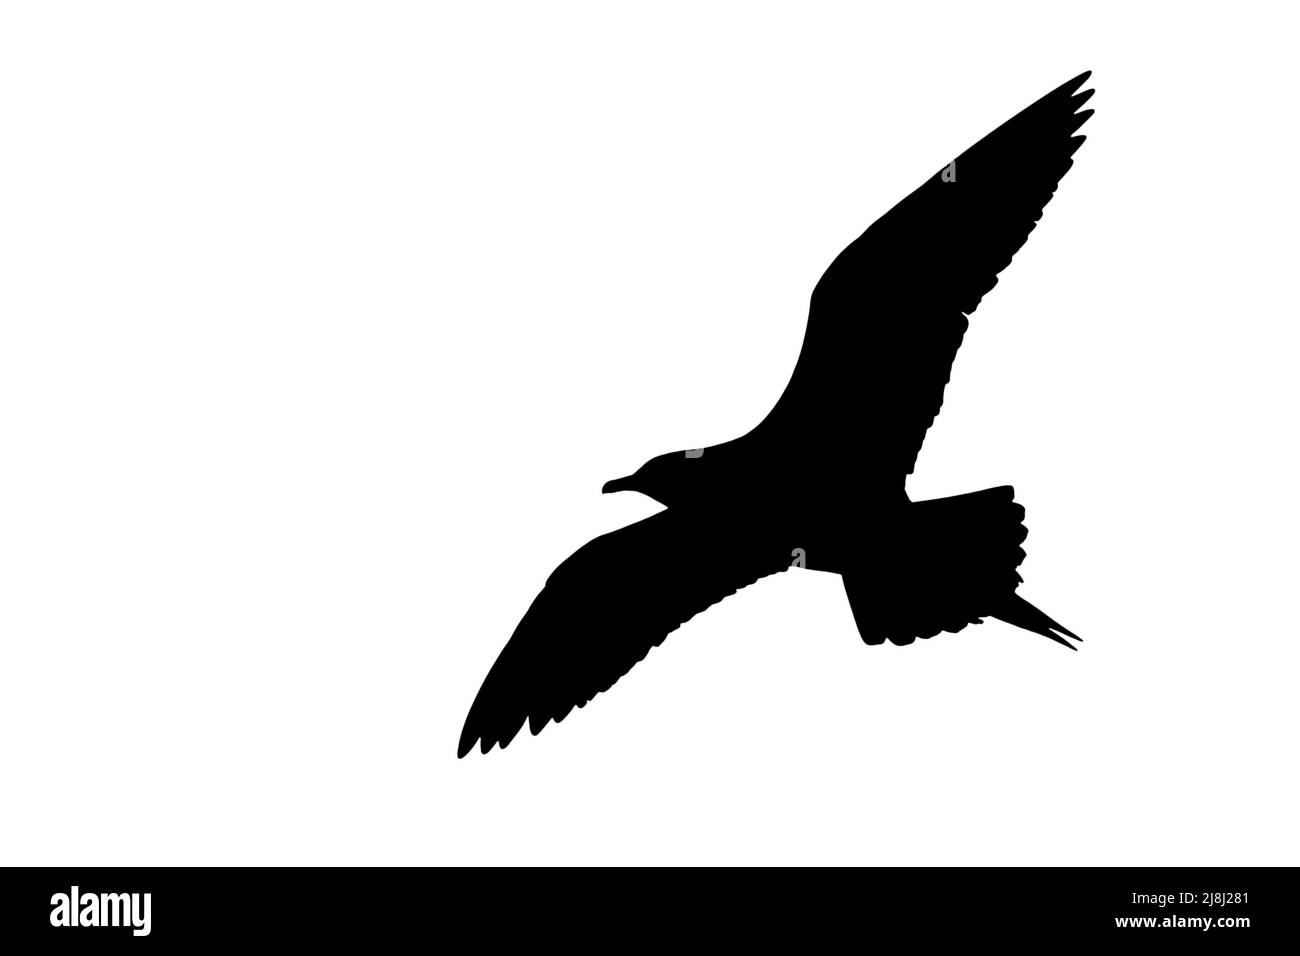 Silhouette of Arctic skua / parasitic jaeger (Stercorarius parasiticus) in flight outlined against white background to show wings, head and tail shape Stock Photo